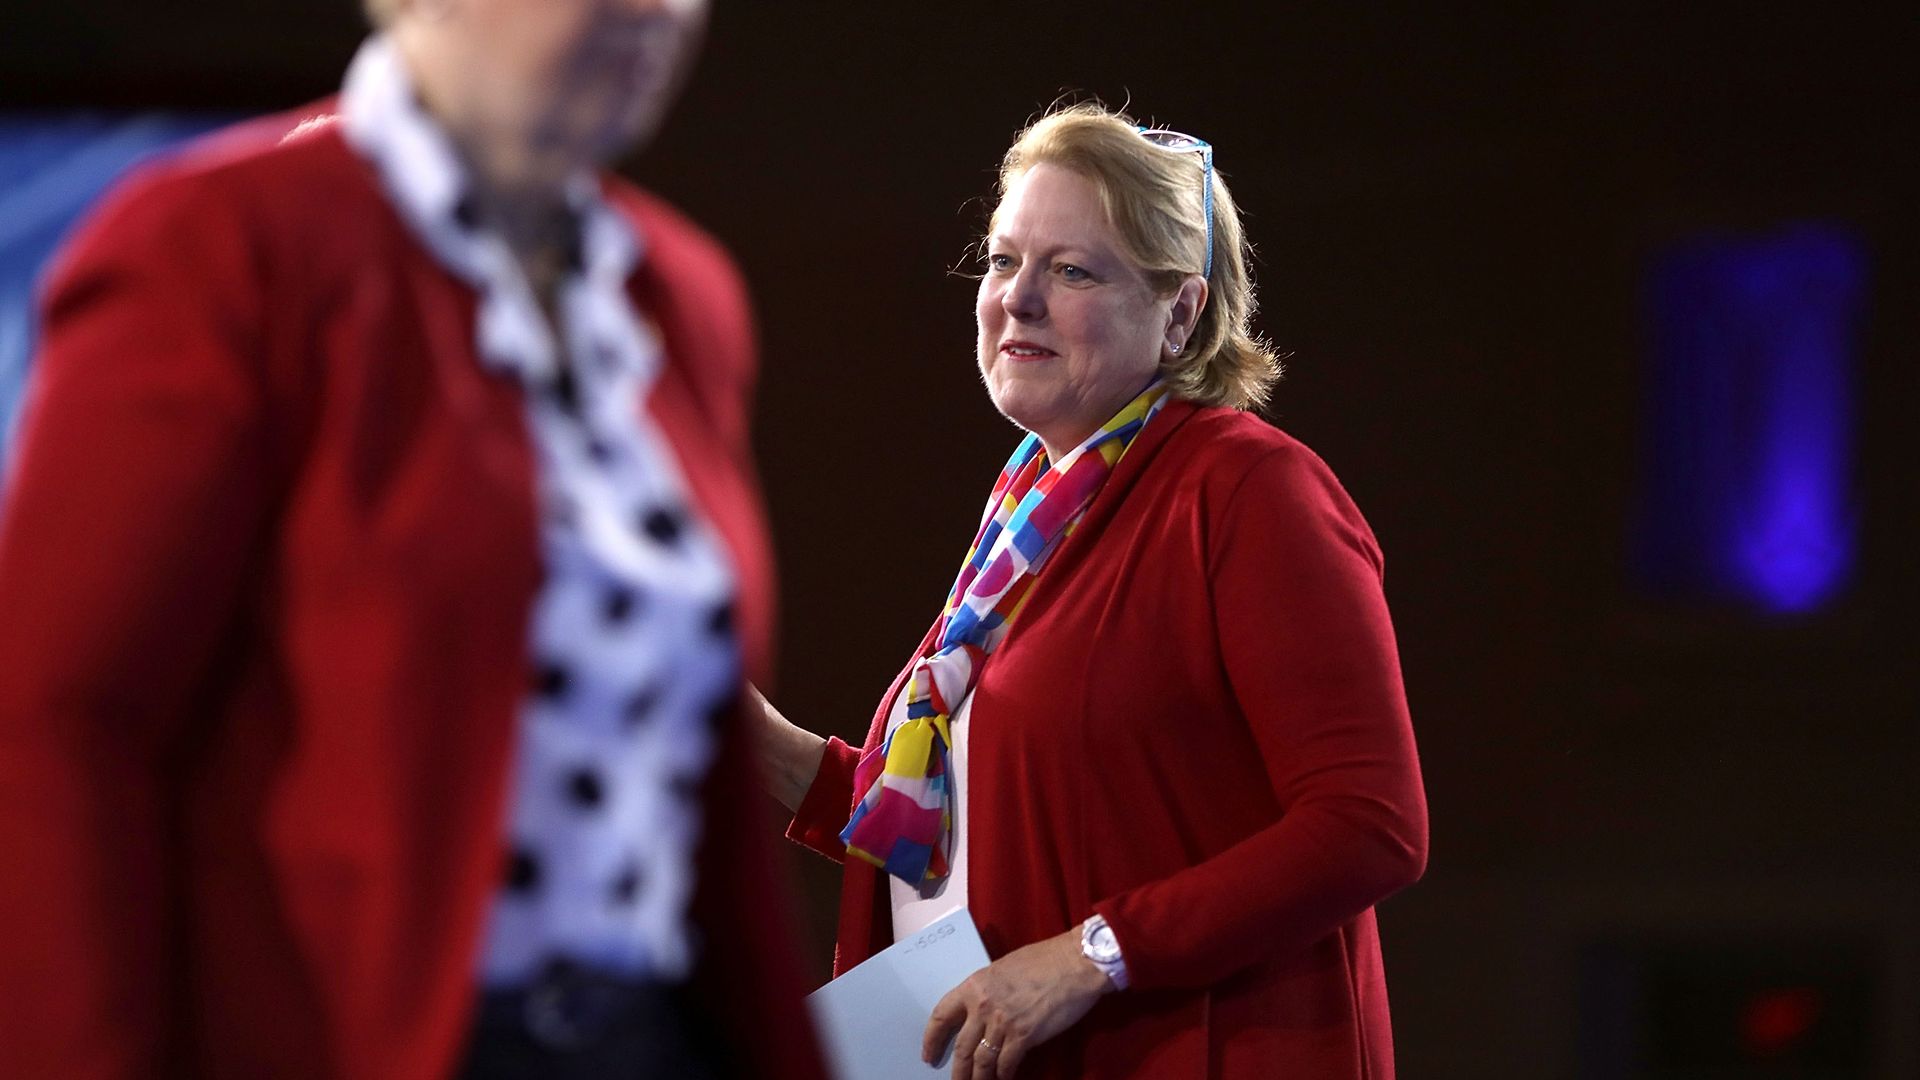 Photo of Ginni Thomas on a stage wearing a red sweater